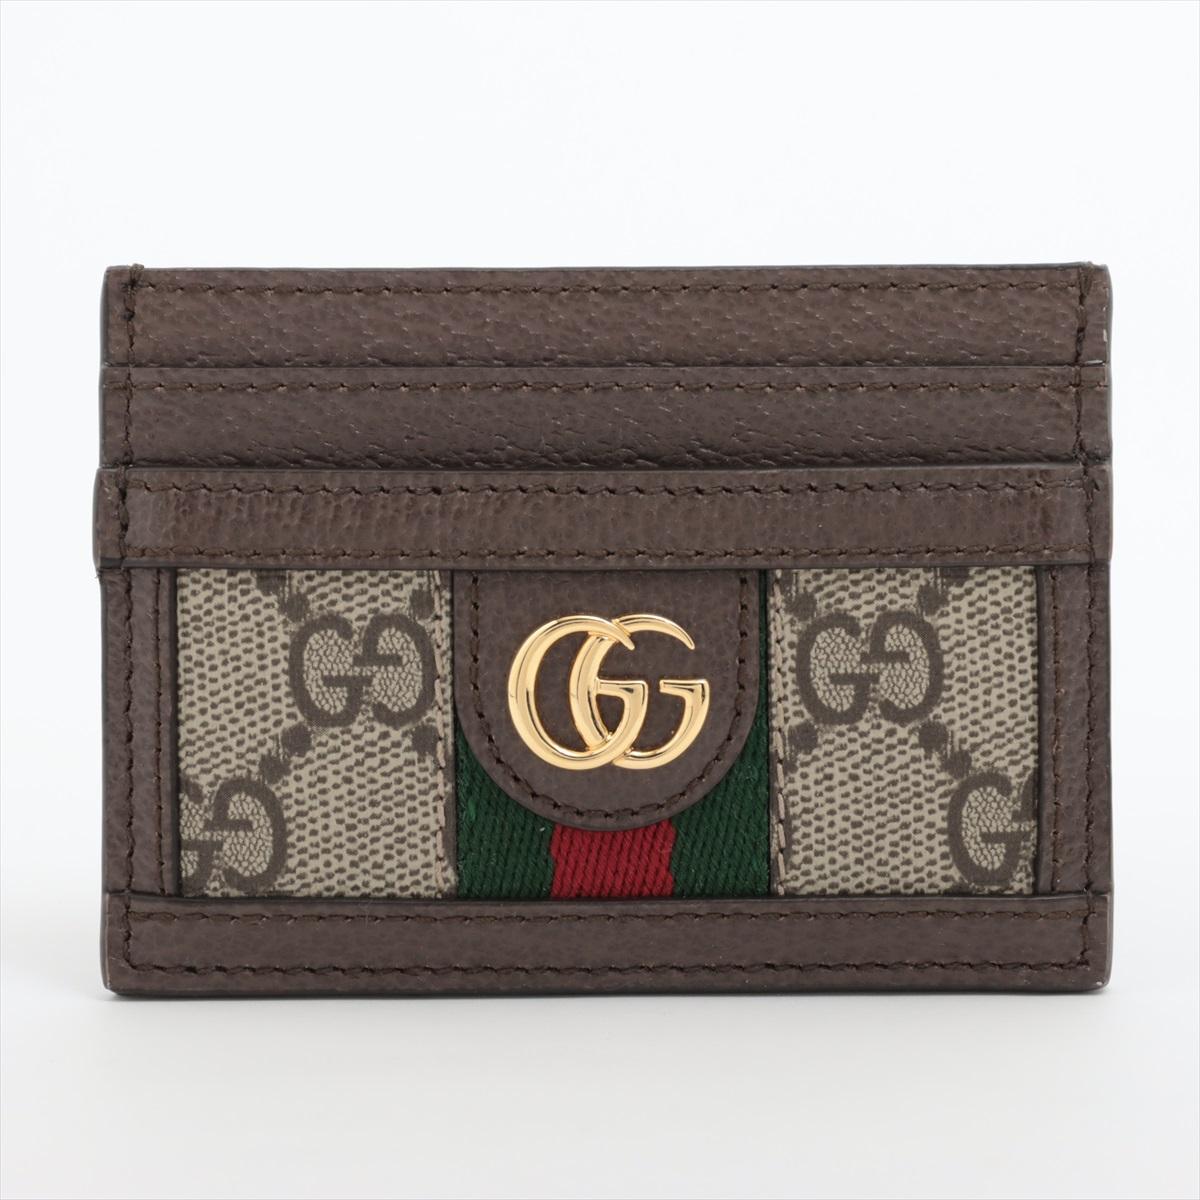 The Gucci GG Supreme Card Case in Brown is a sleek and stylish accessory that combines timeless elegance with modern flair. Crafted from the brand's iconic GG canvas, the card case features classic brown monogram pattern synonymous with Gucci's